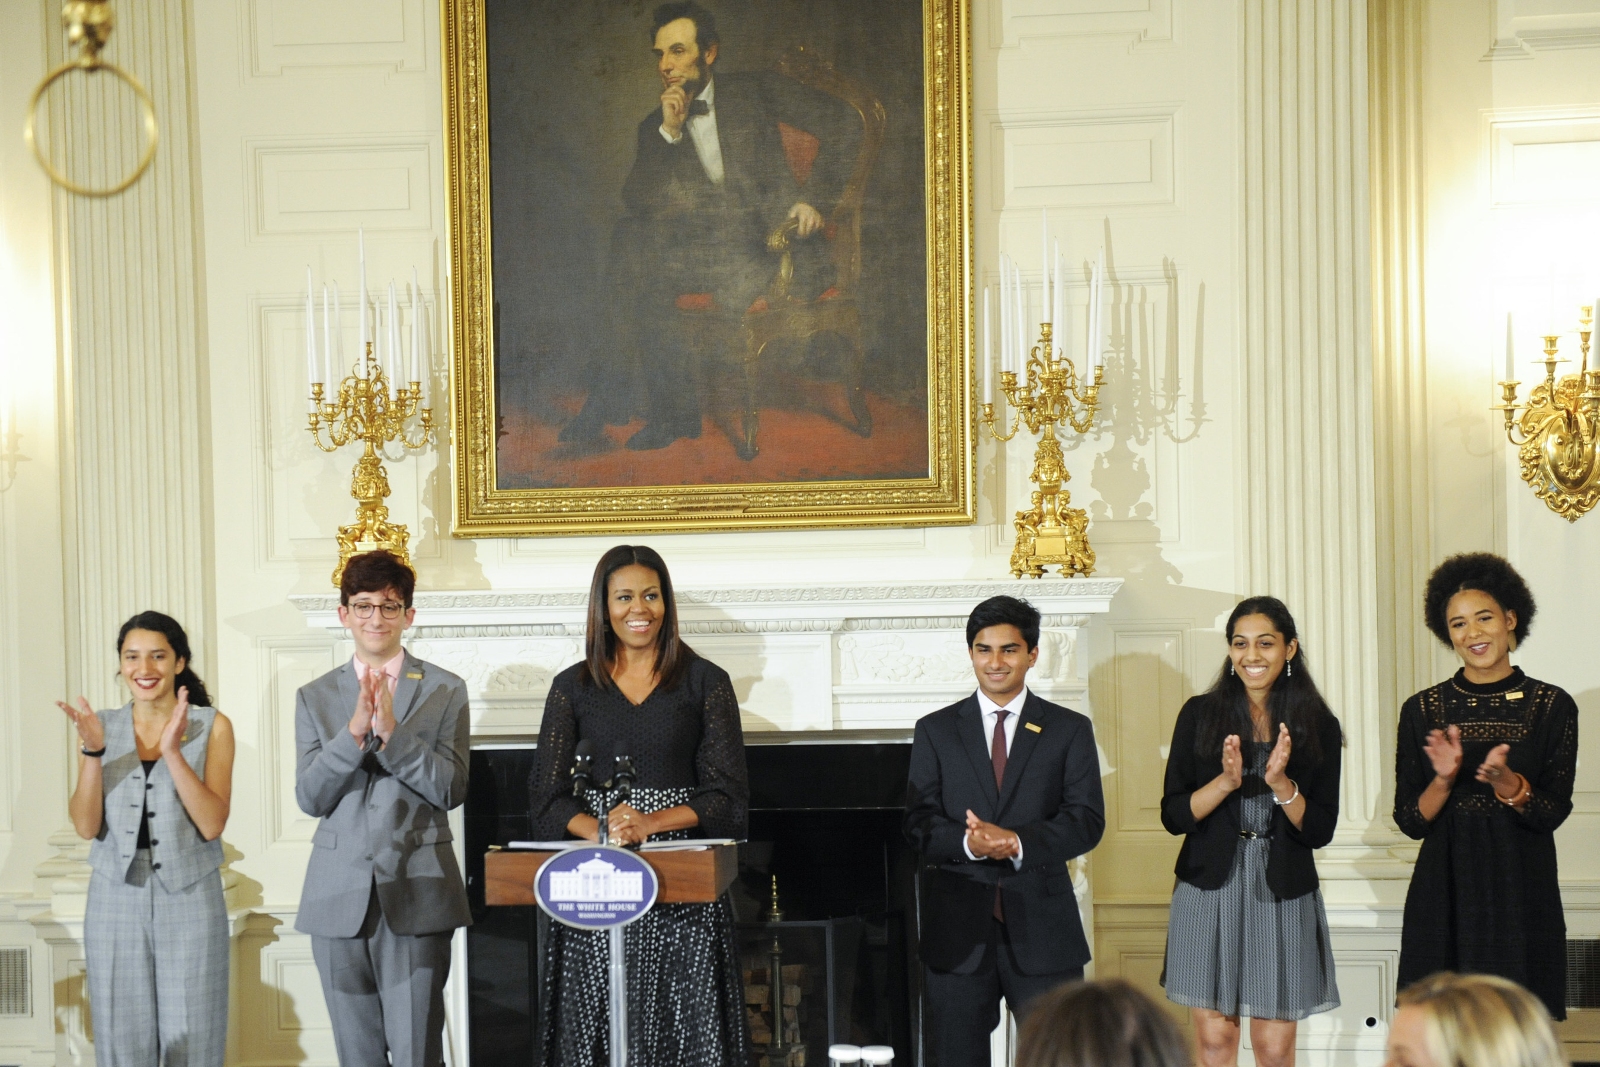 2016 class of National Student Poets with First Lady Michele Obama at White House ceremony (Courtesy of White House)